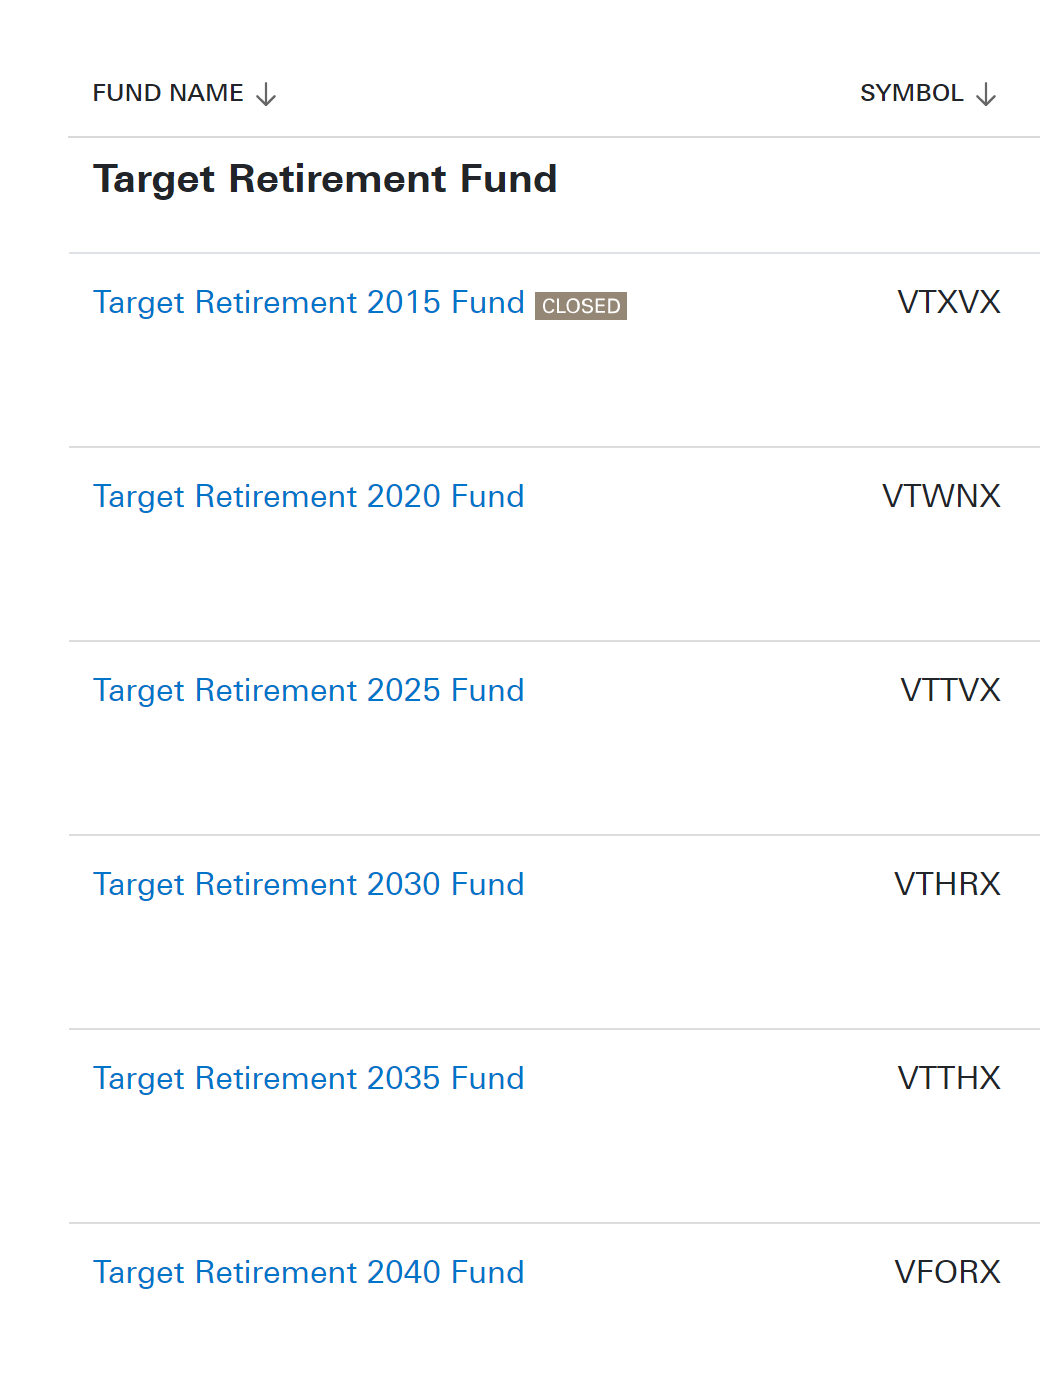 Target date funds target every 5 years